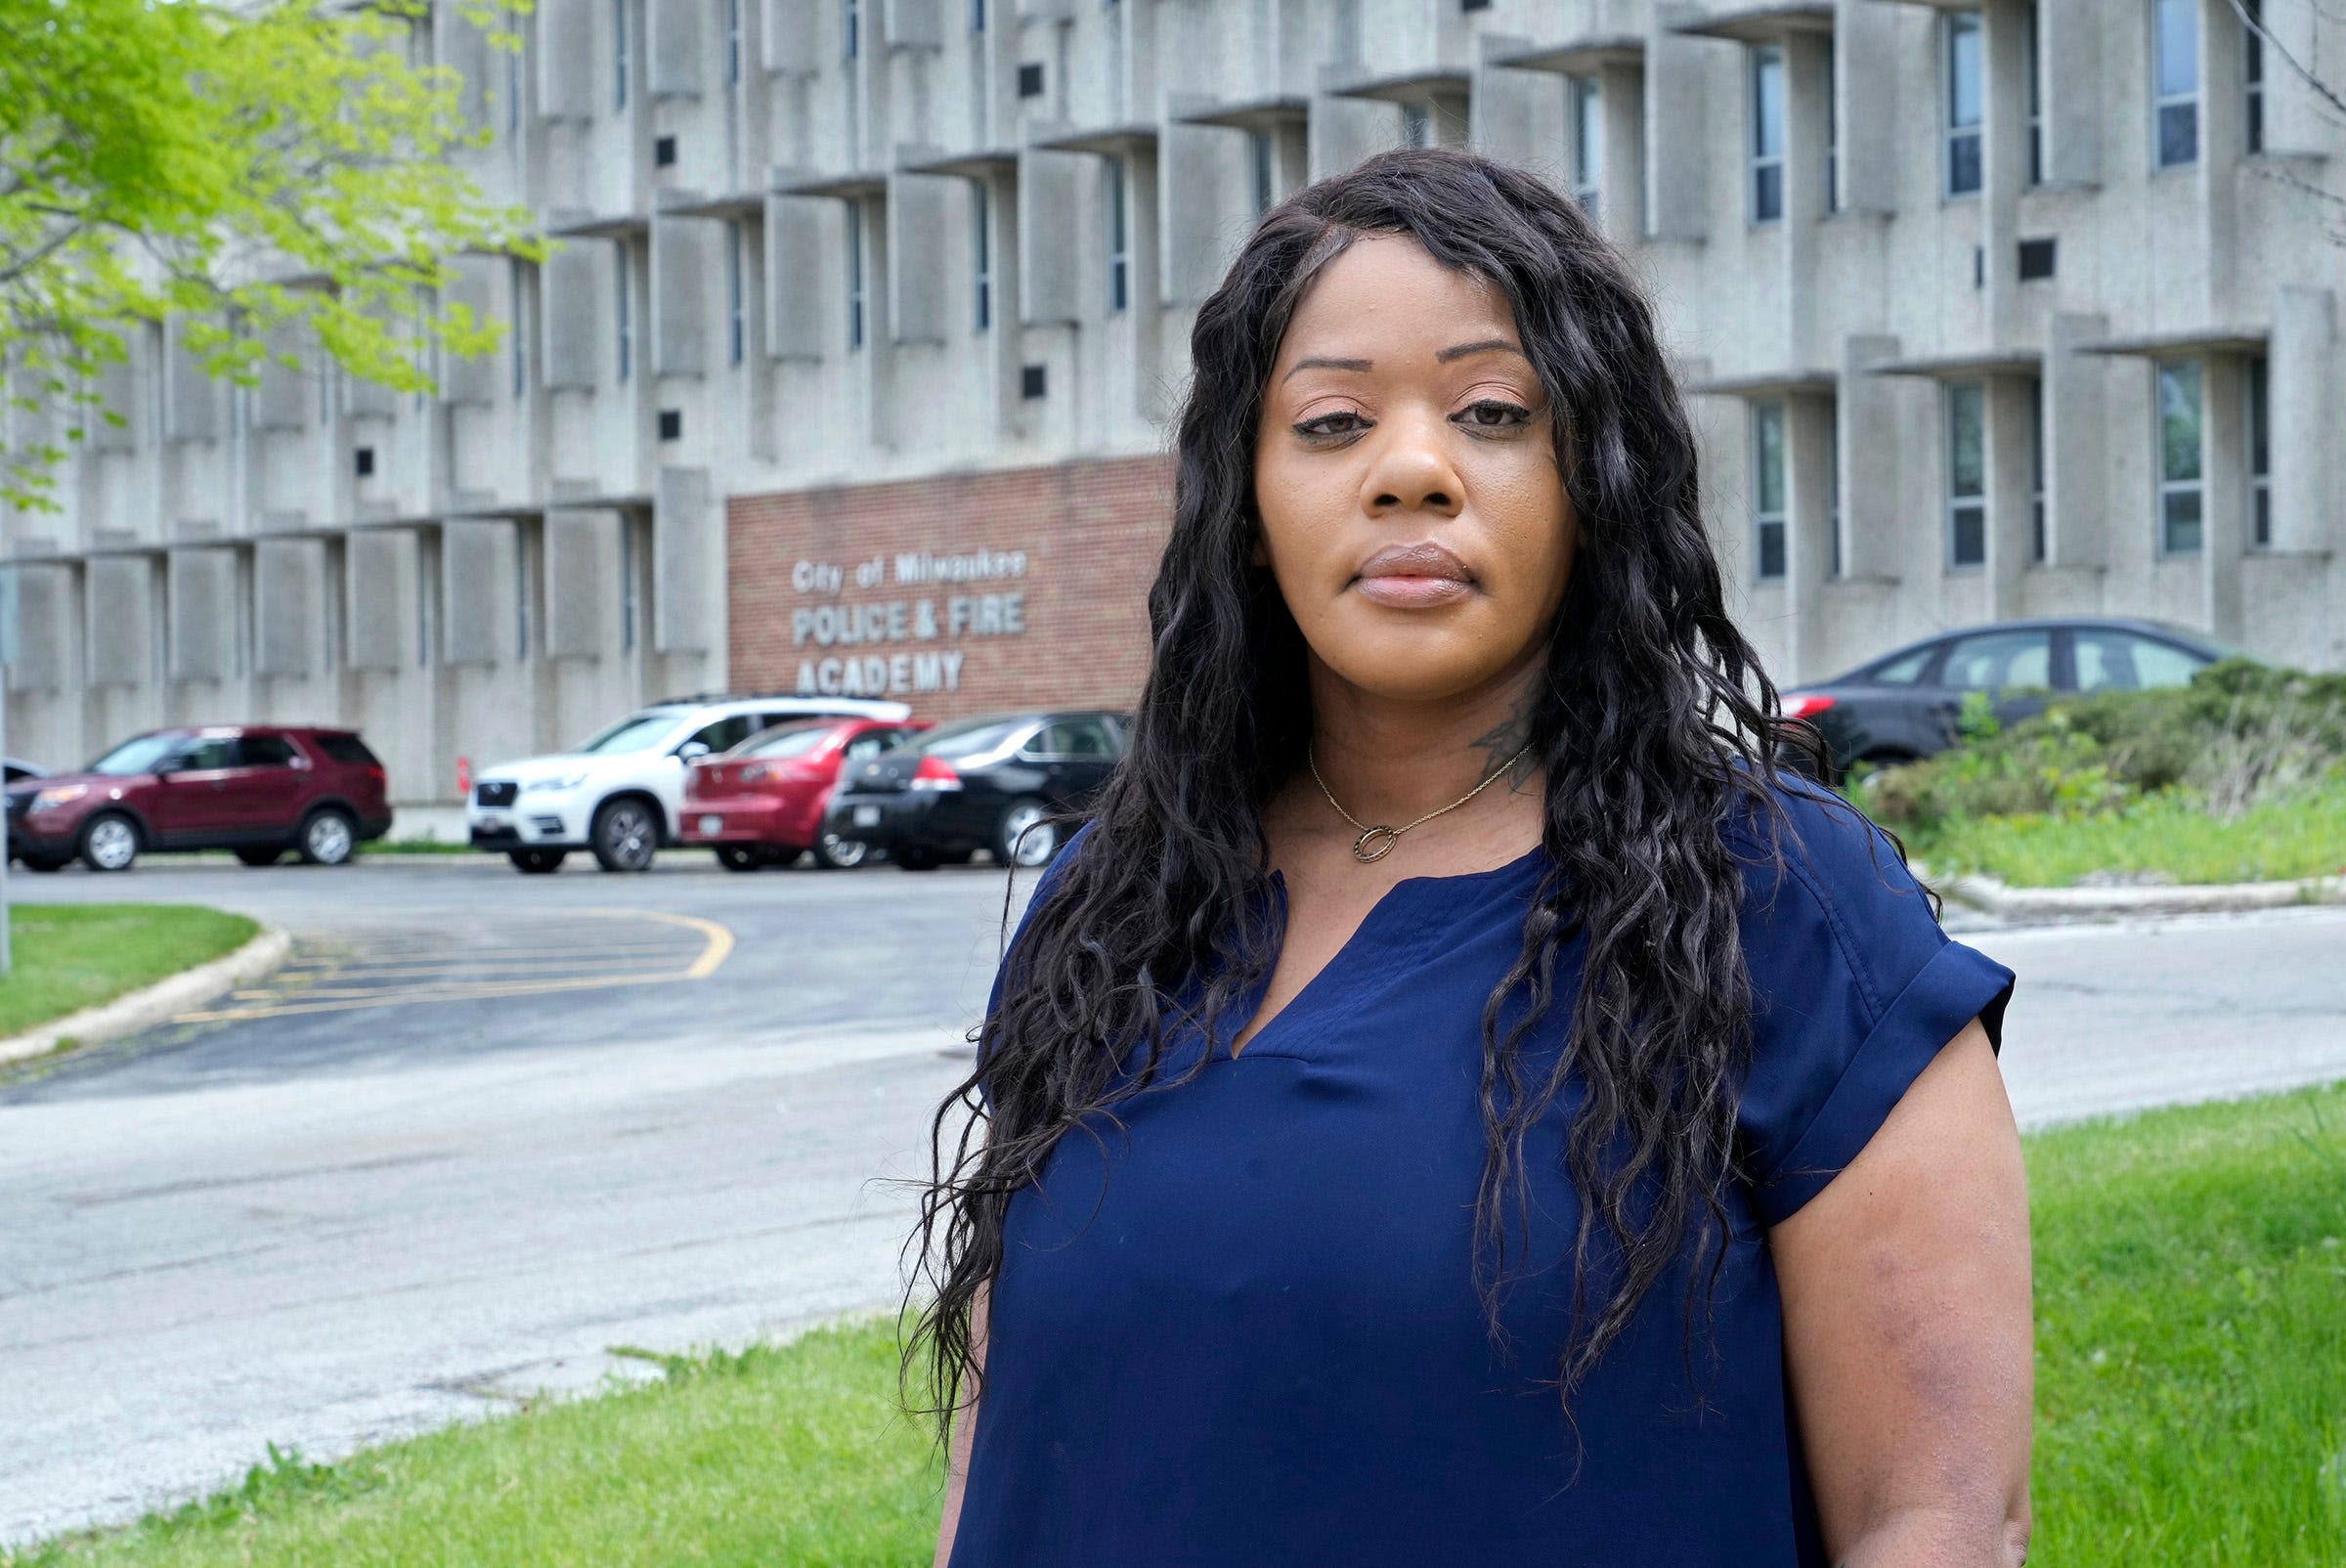 She wanted to be a Milwaukee police officer. Now, she's suing over hiring practices